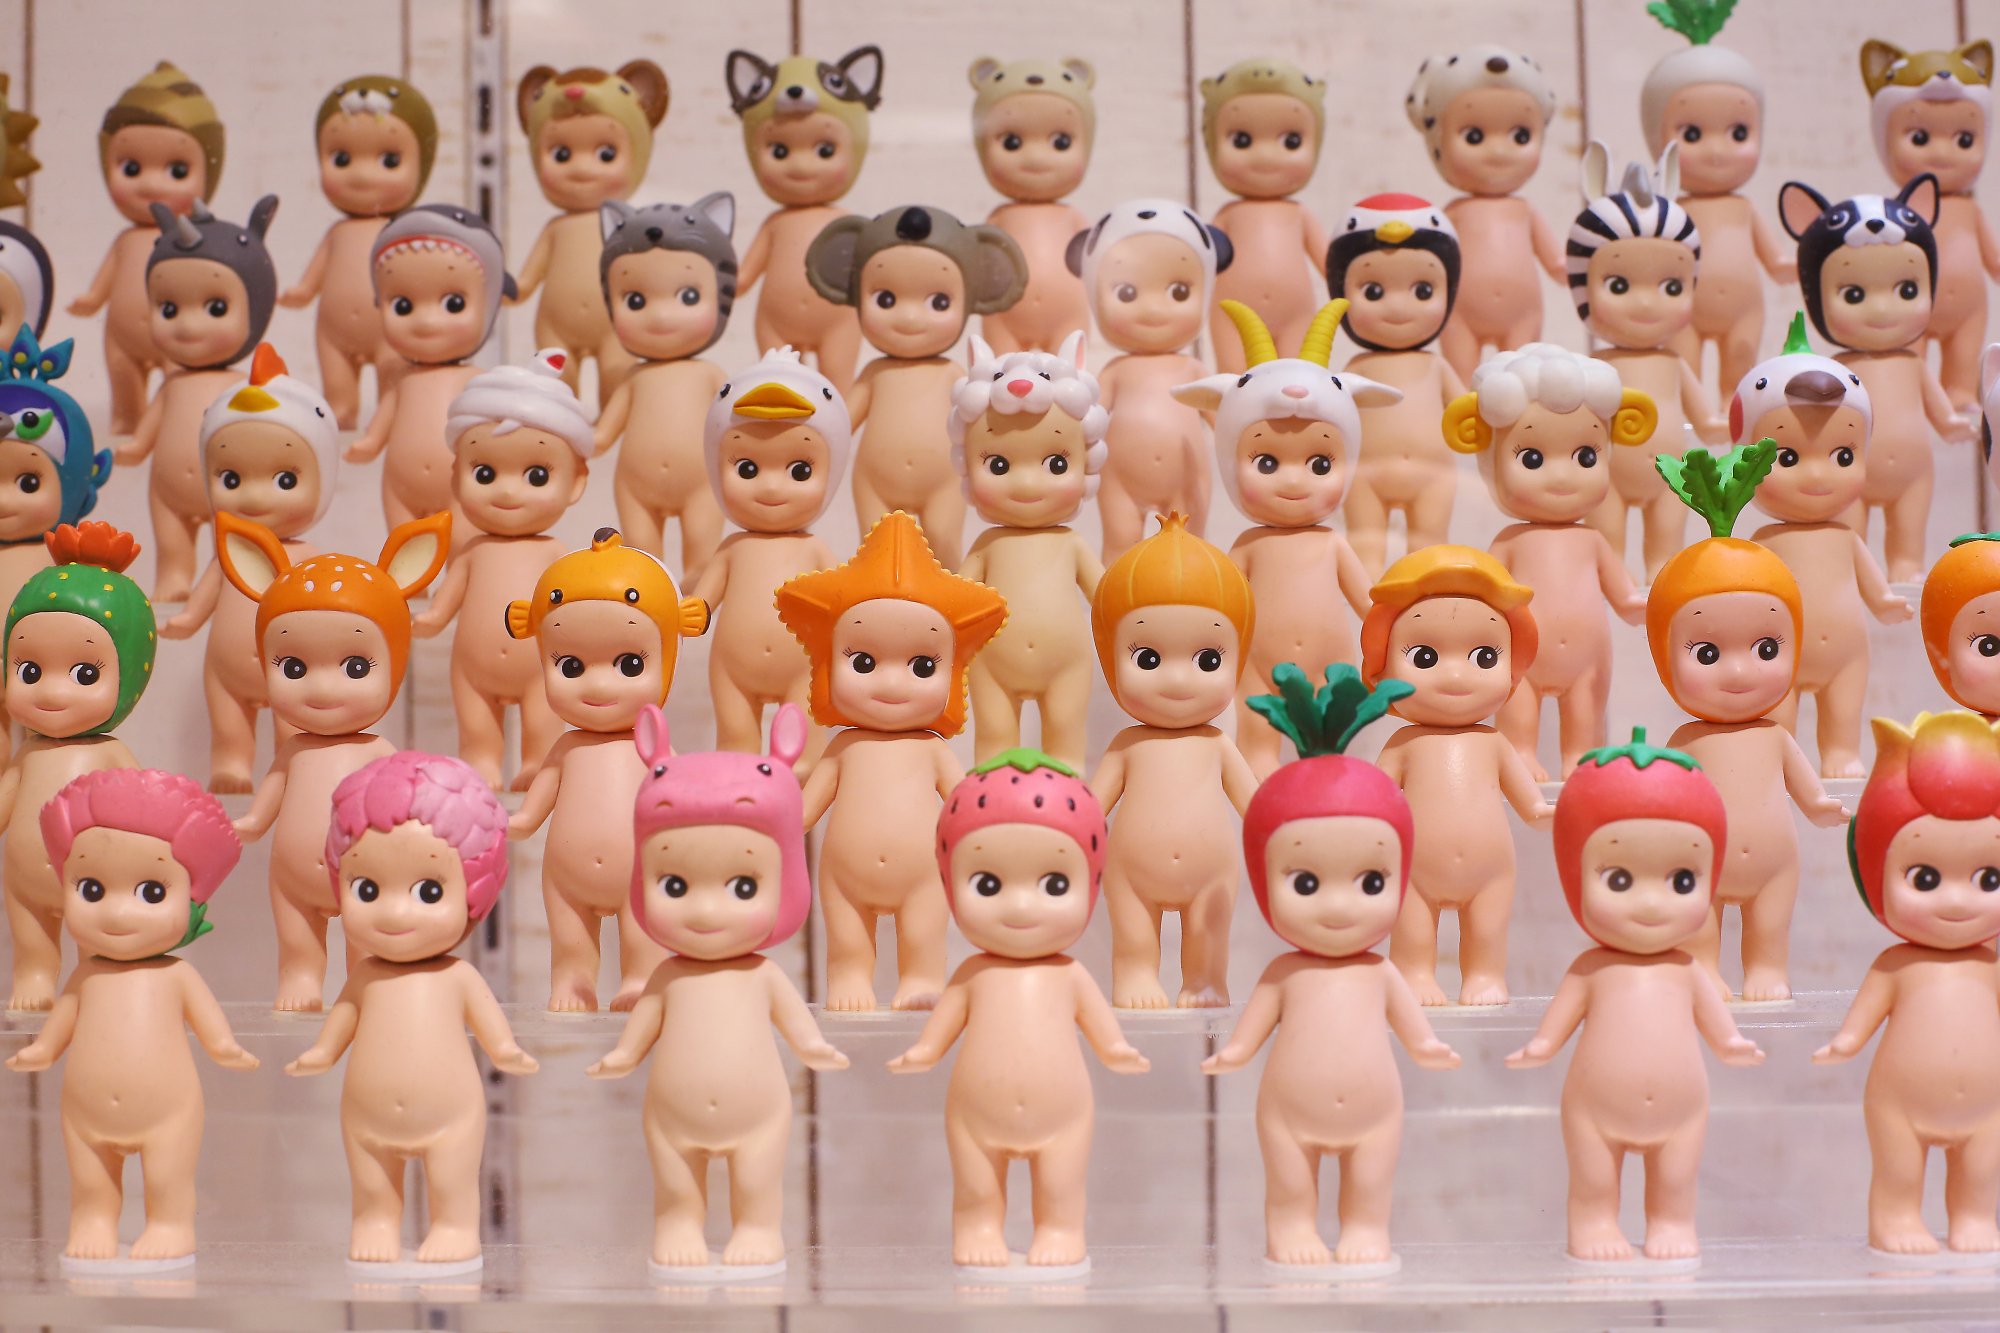 Five rows of Sonny Angel dolls lined up on a clear acrylic riser.